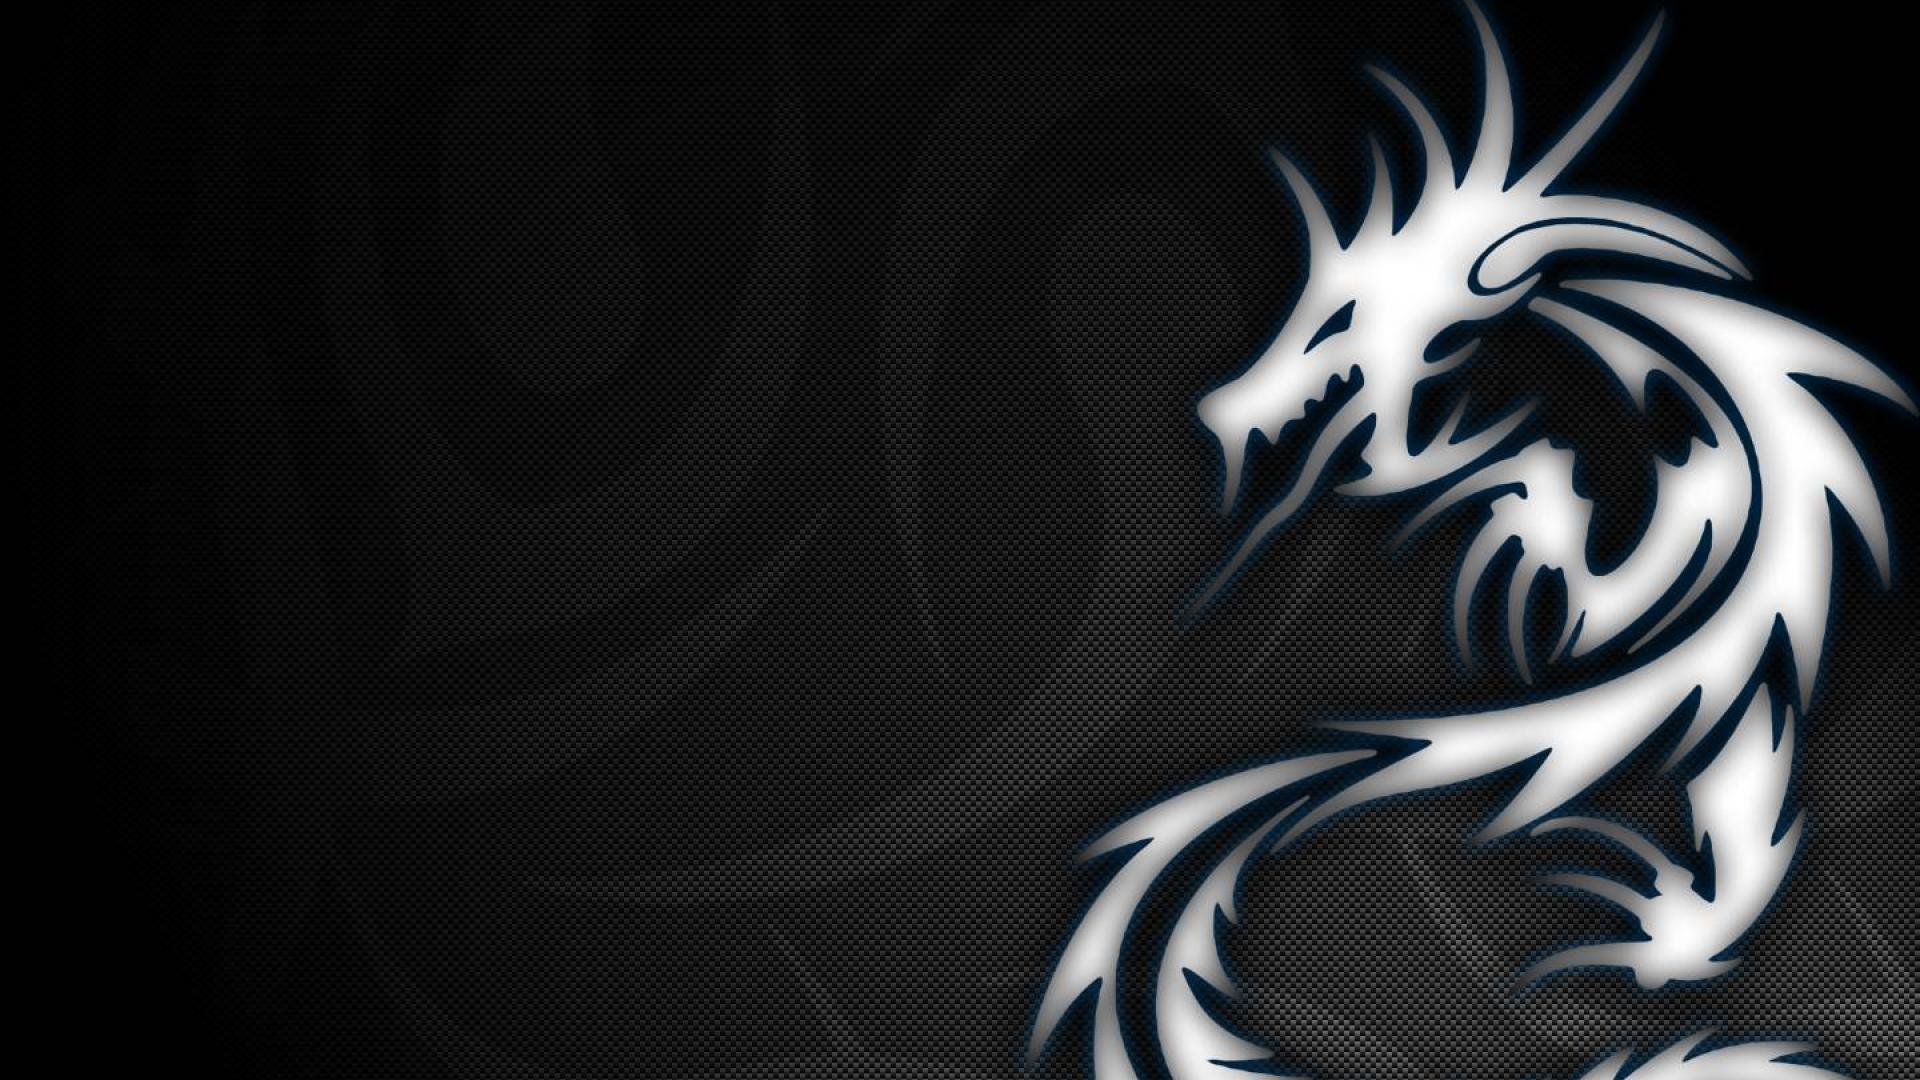 Sign dragon wallpaper - High Quality and Resolution